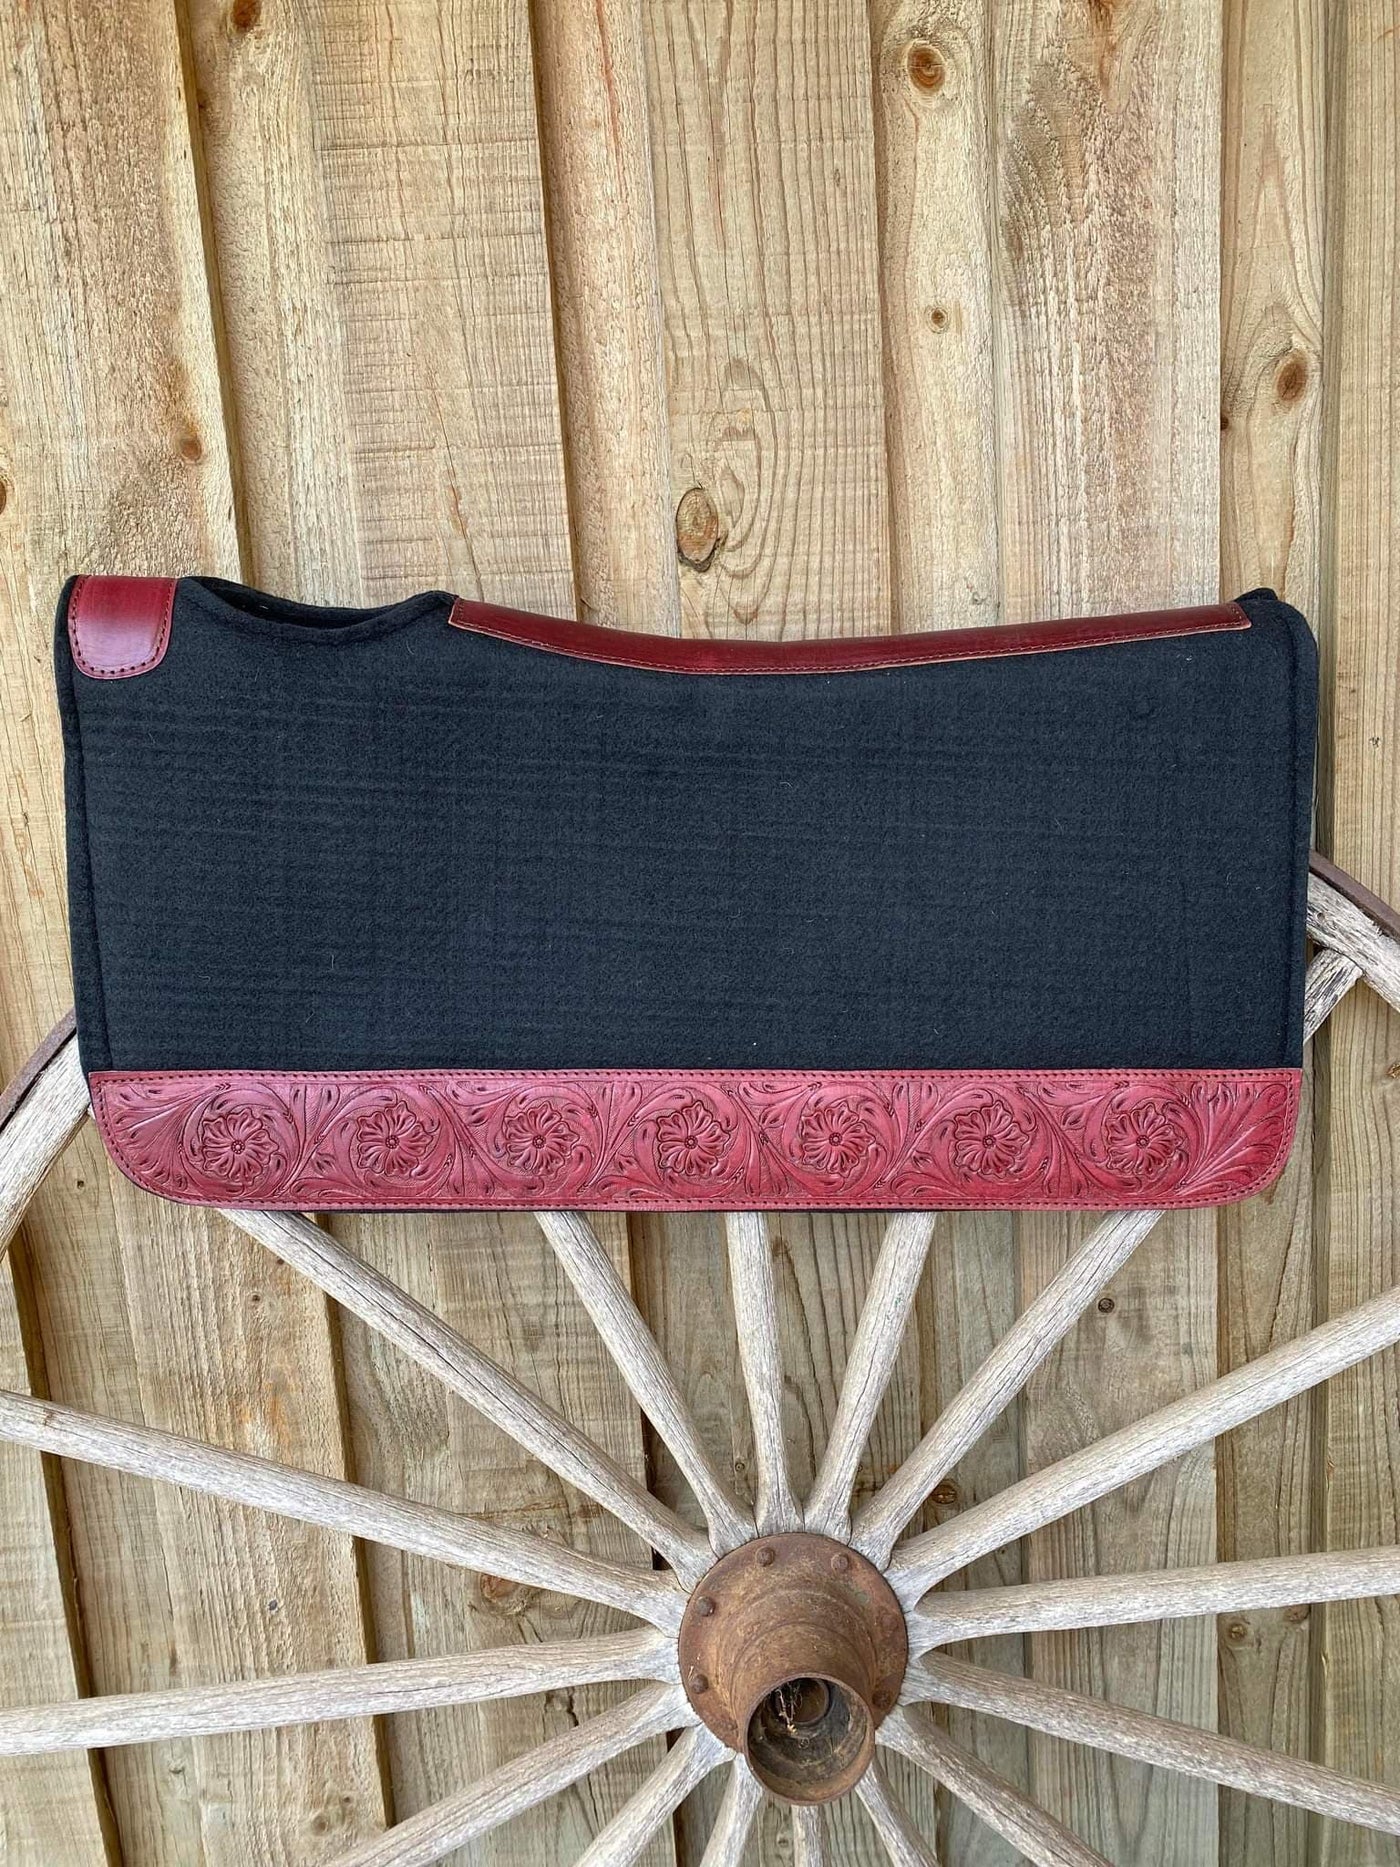 Western Saddle Pad Felt Contoured 31" X 32" Pad with Floral Leather Wears